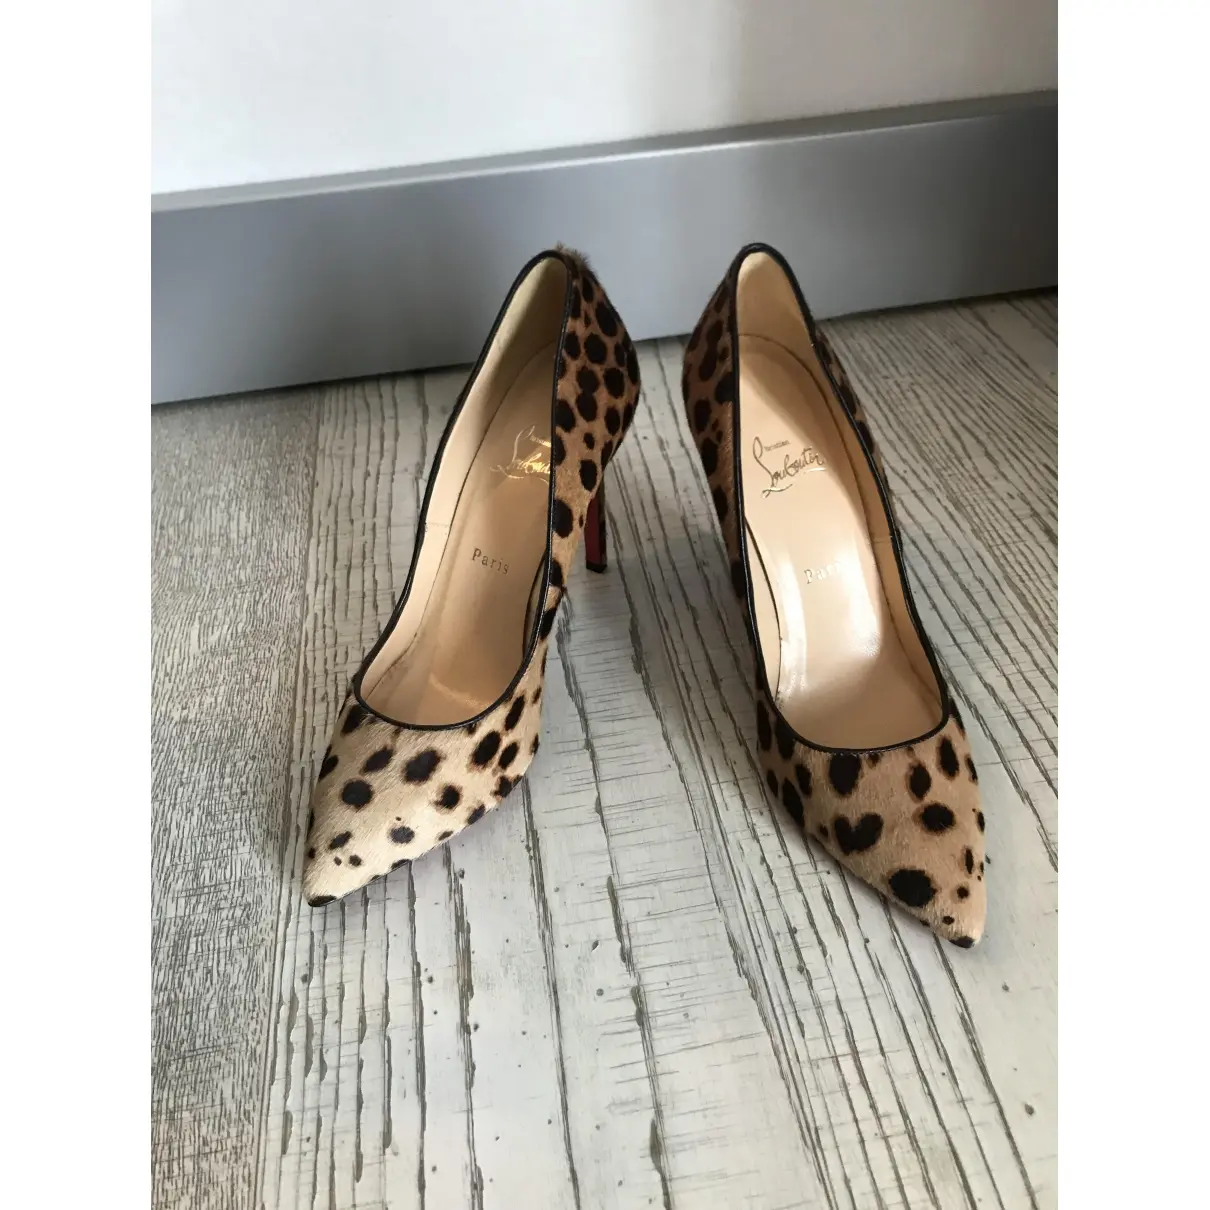 Christian Louboutin Pigalle pony-style calfskin heels for sale